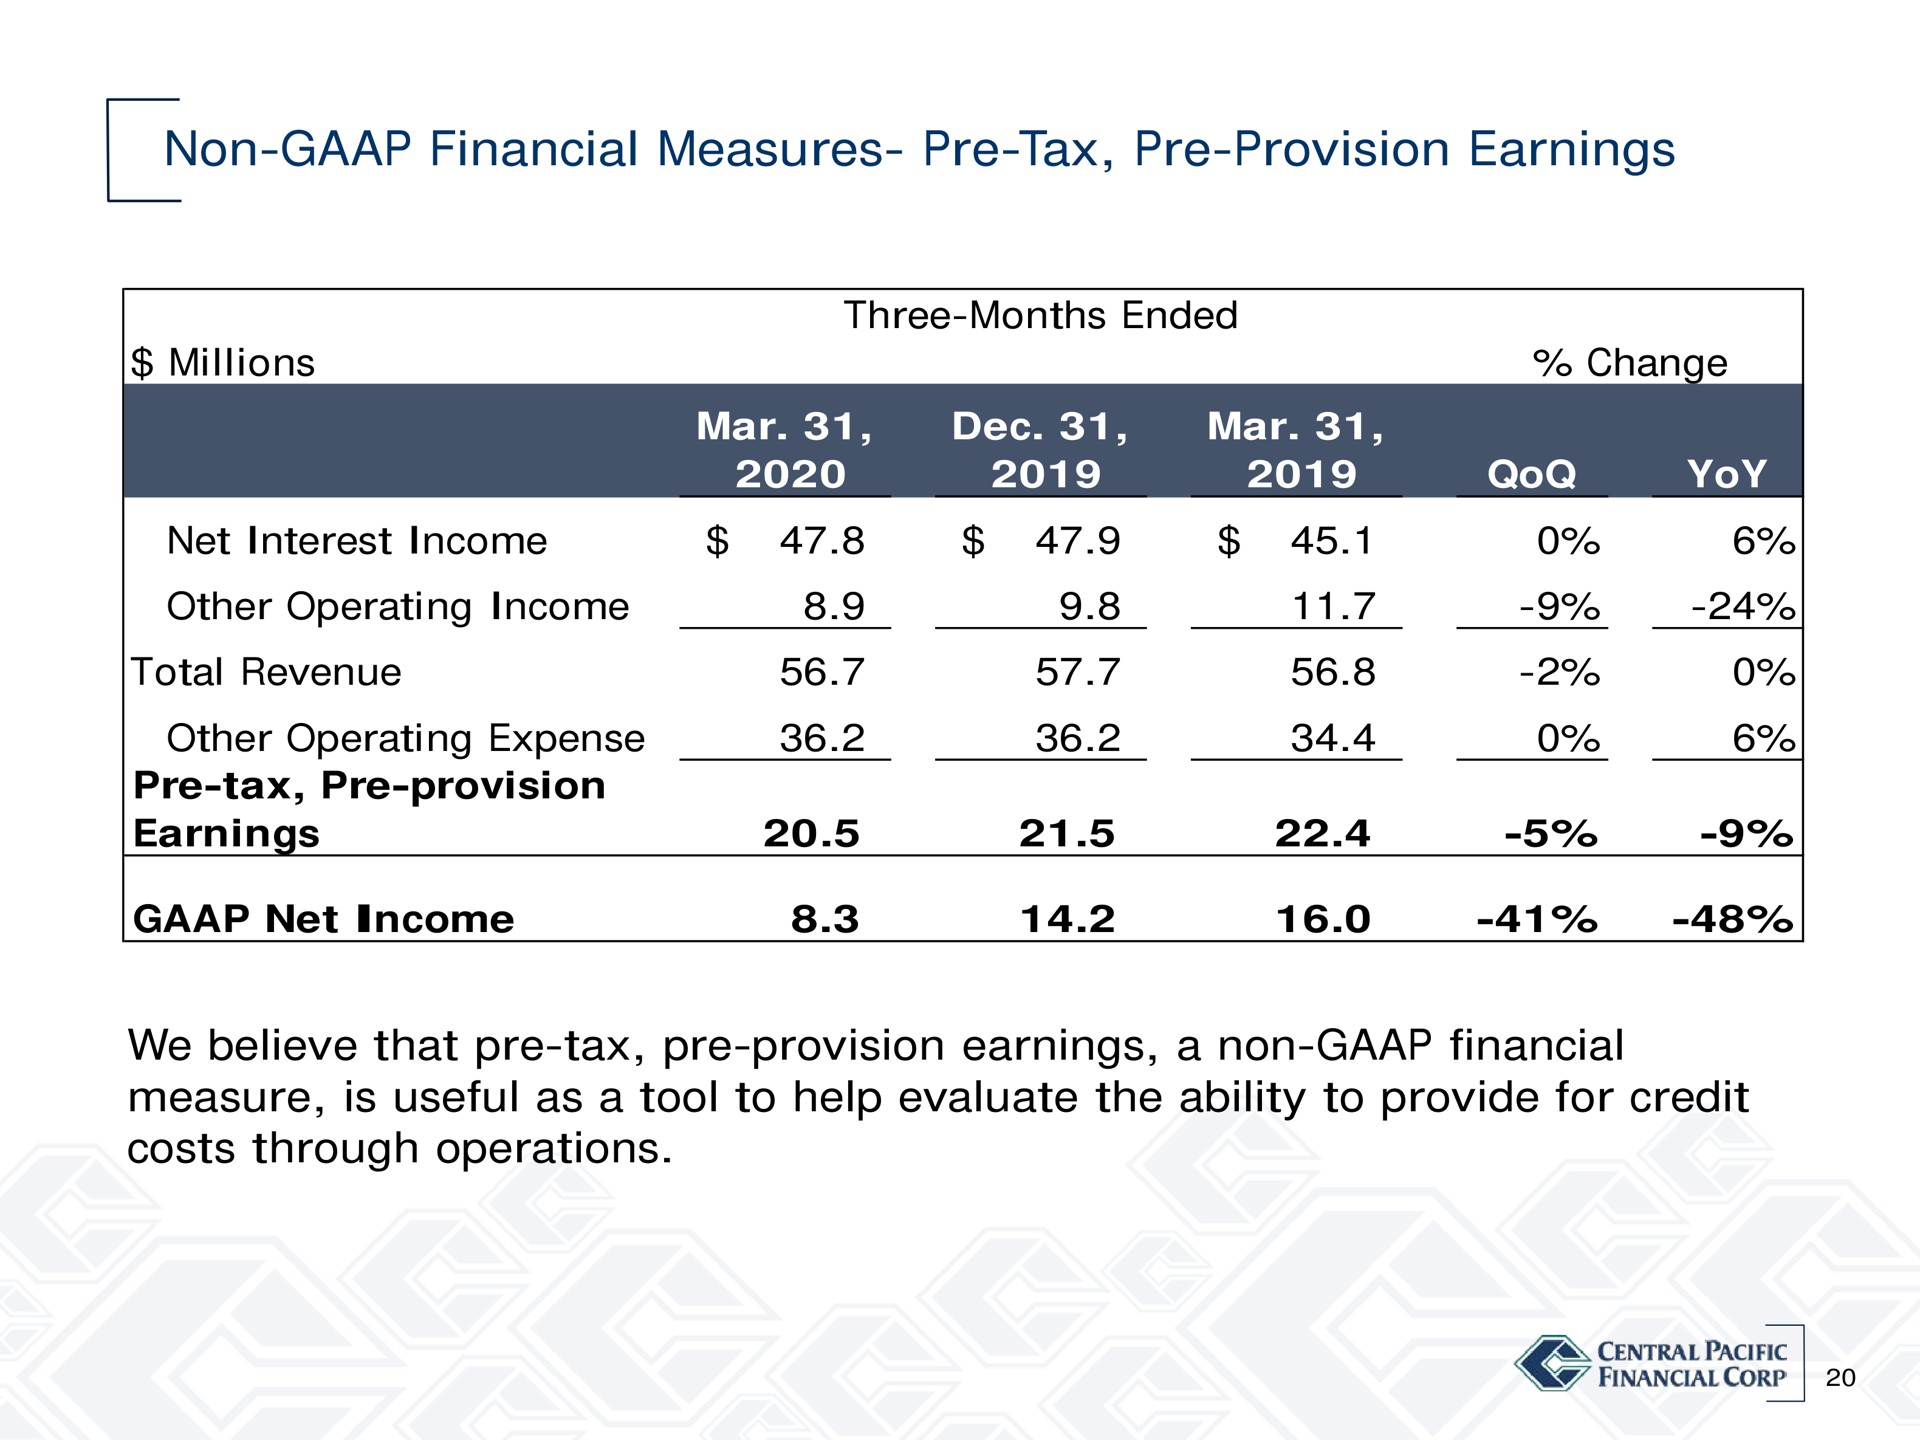 non financial measures tax provision earnings we believe that tax provision earnings a non financial measure is useful as a tool to help evaluate the ability to provide for credit costs through operations | Central Pacific Financial